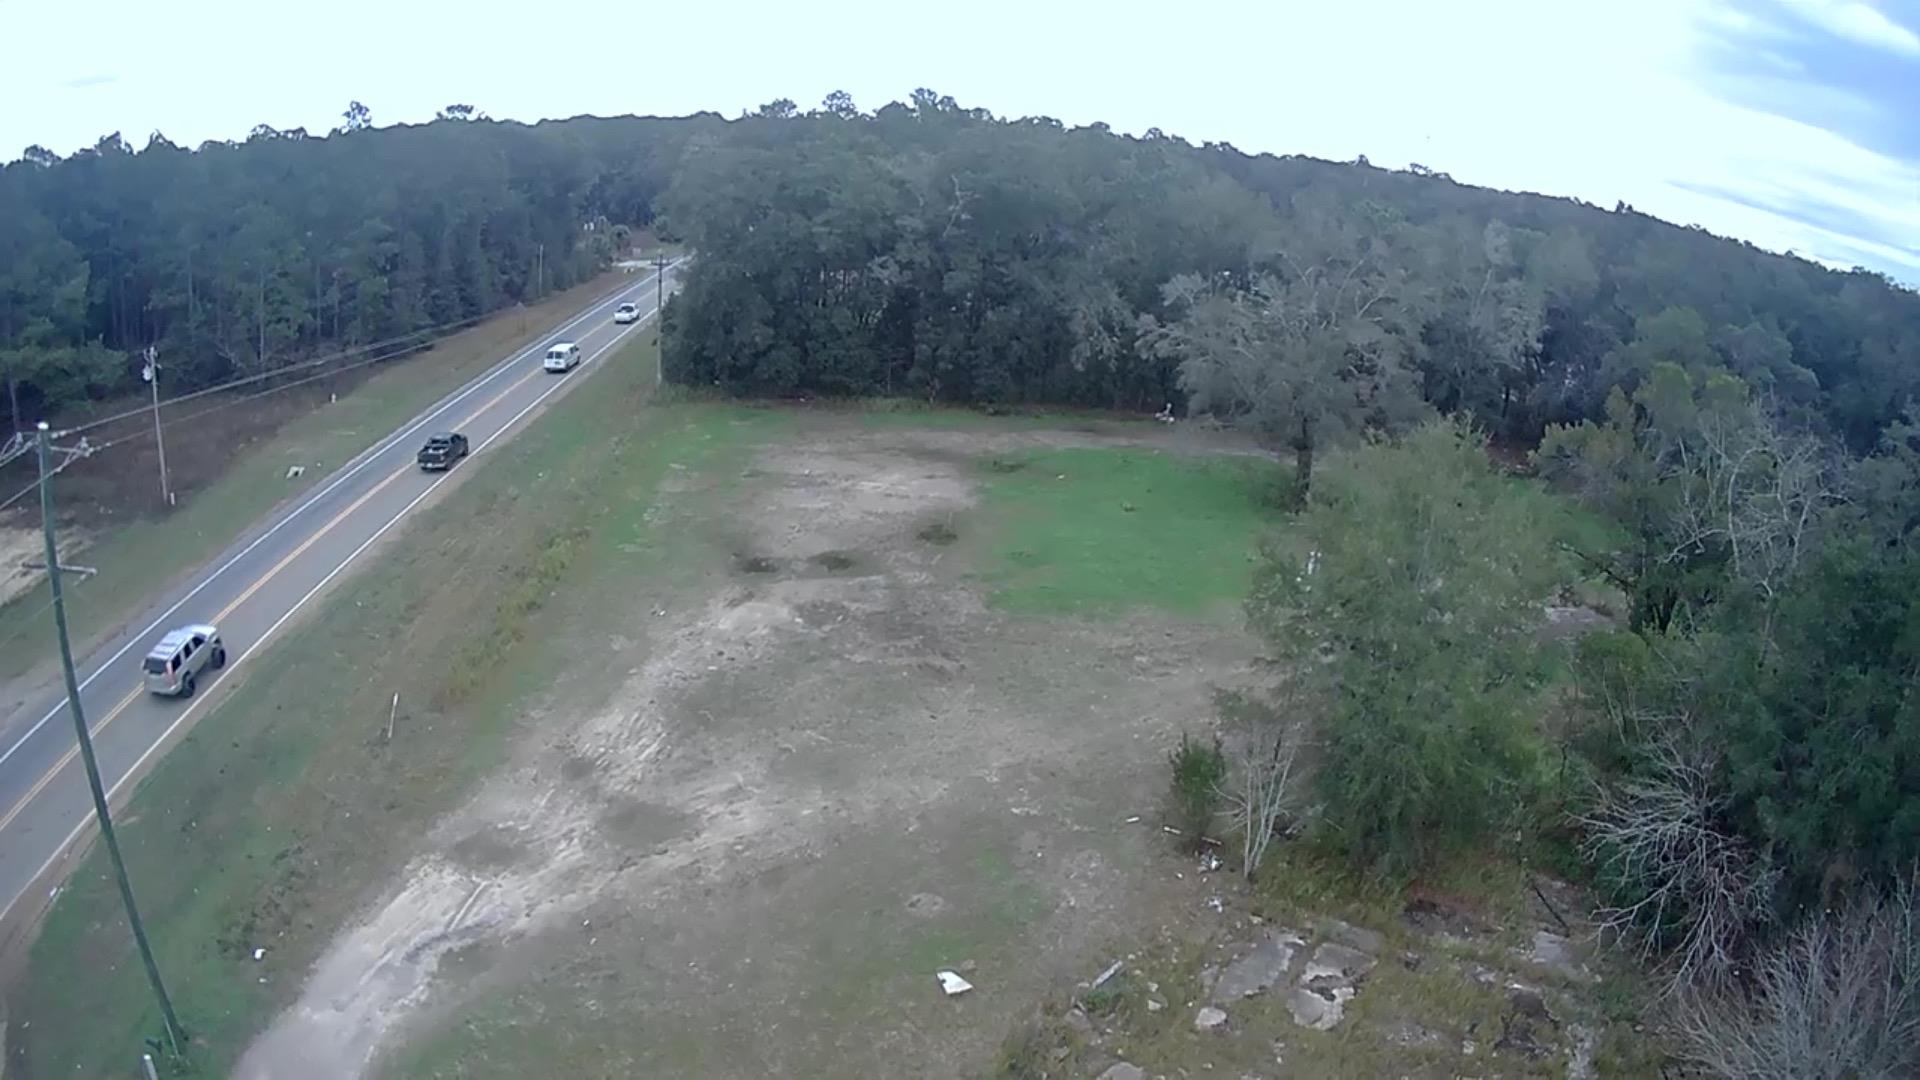 1.88 acres of commercial property zoned  C-2 General Commerical  Property has a well on it that can be used, or city water tap can be put in. This is a prime location if you're looking for a place to build your business. Survey available